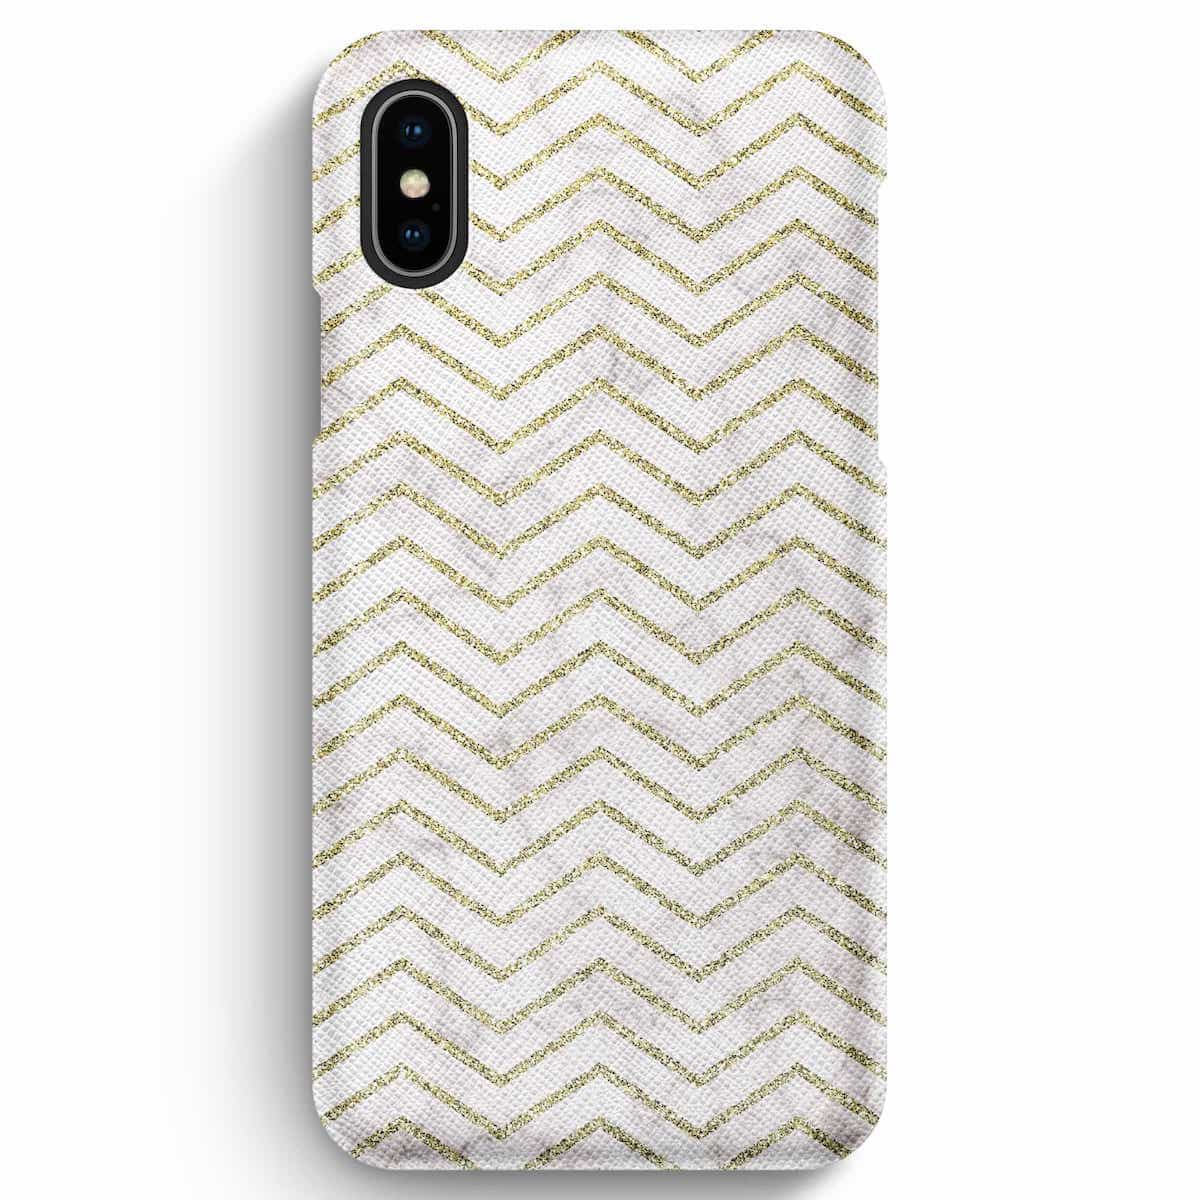 Mobile Mob True Envy iPhone XS Max Case - ZigZag Golden Marble 